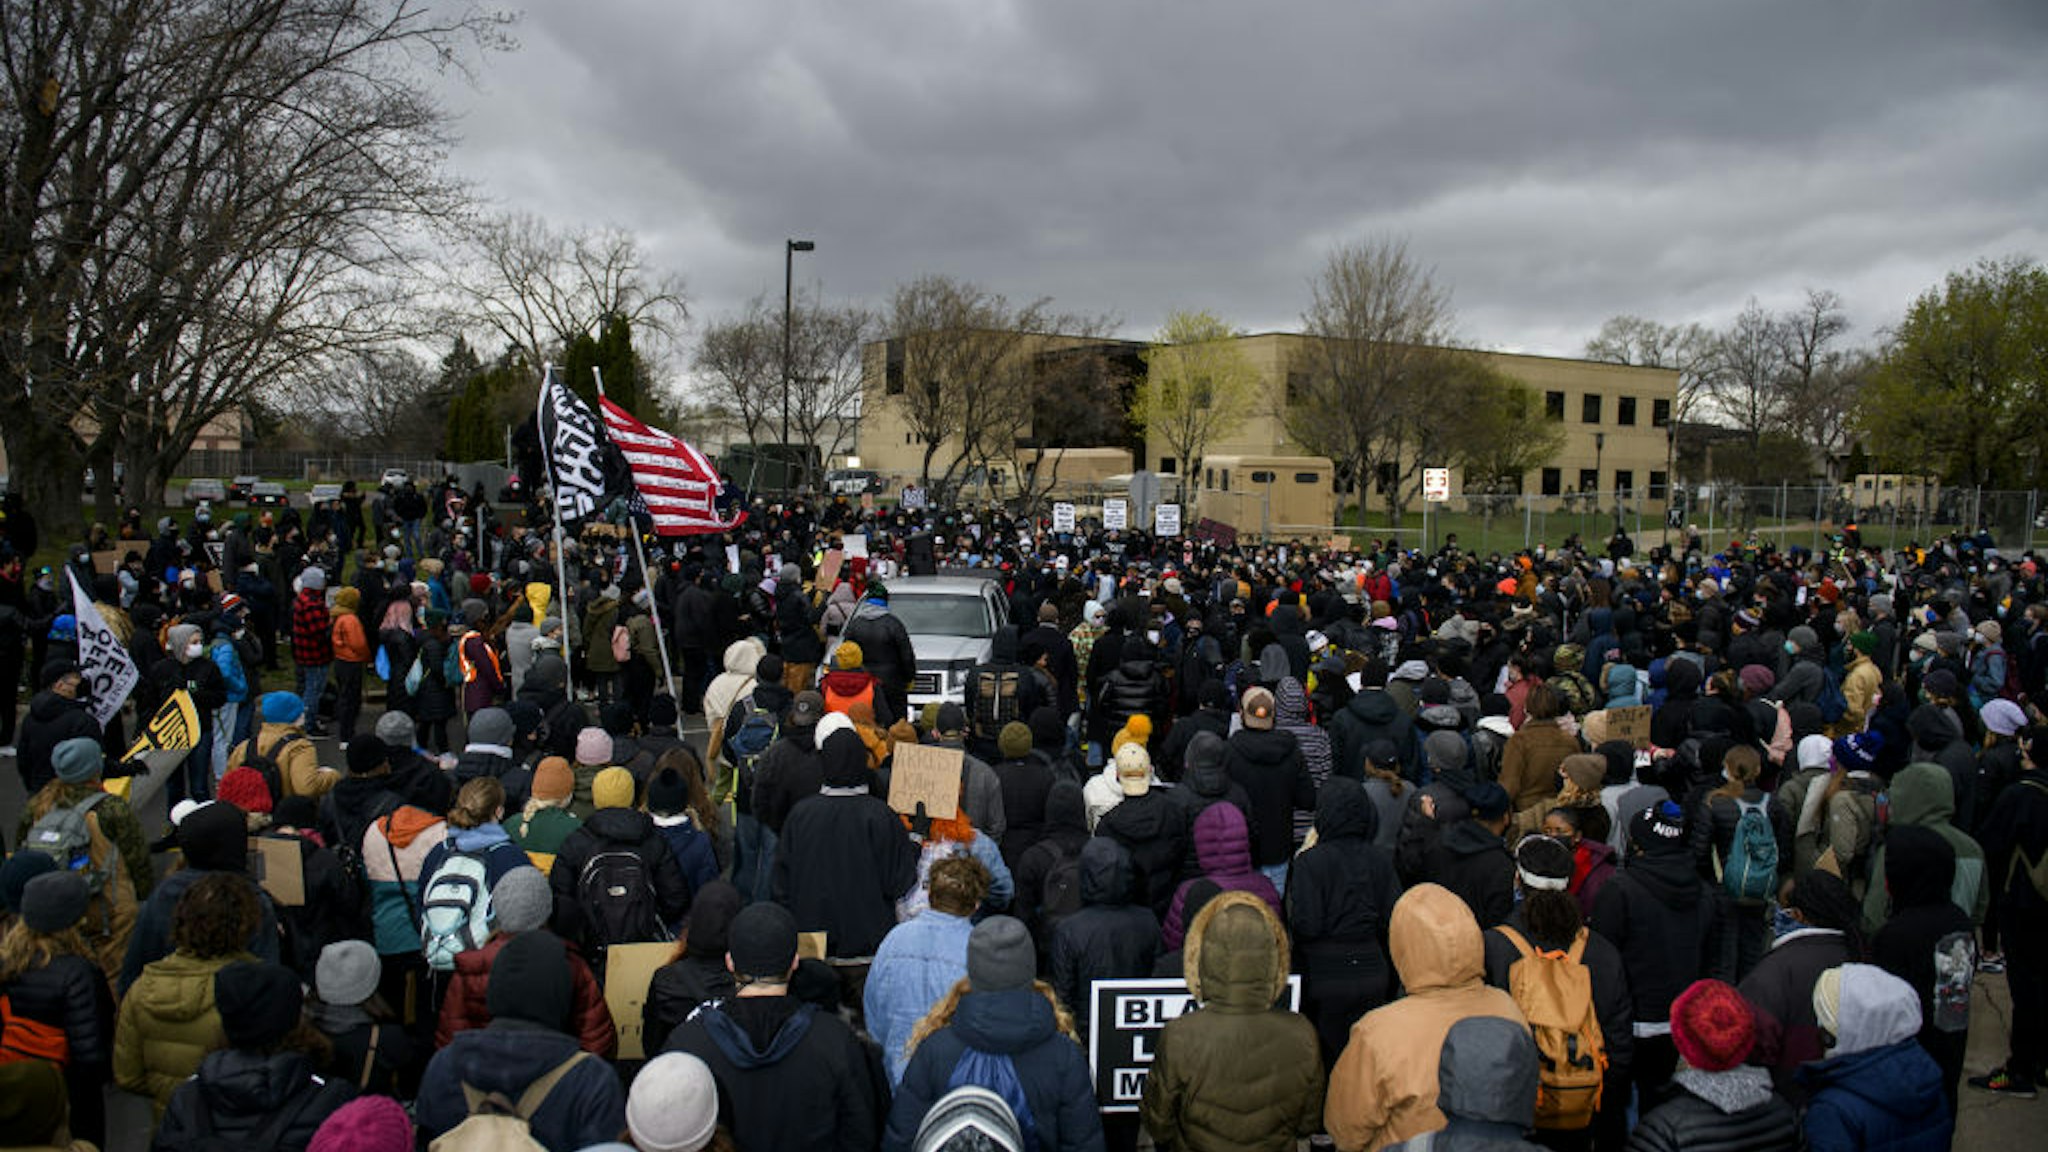 BROOKLYN CENTER, MN - APRIL 13: Protesters gather outside the Brooklyn Center police headquarters on April 13, 2021 in Brooklyn Center, Minnesota. Demonstrations have become a daily occurrence since Daunte Wright, 20, was shot and killed by Brooklyn Center police officer Kimberly Potter on Sunday.